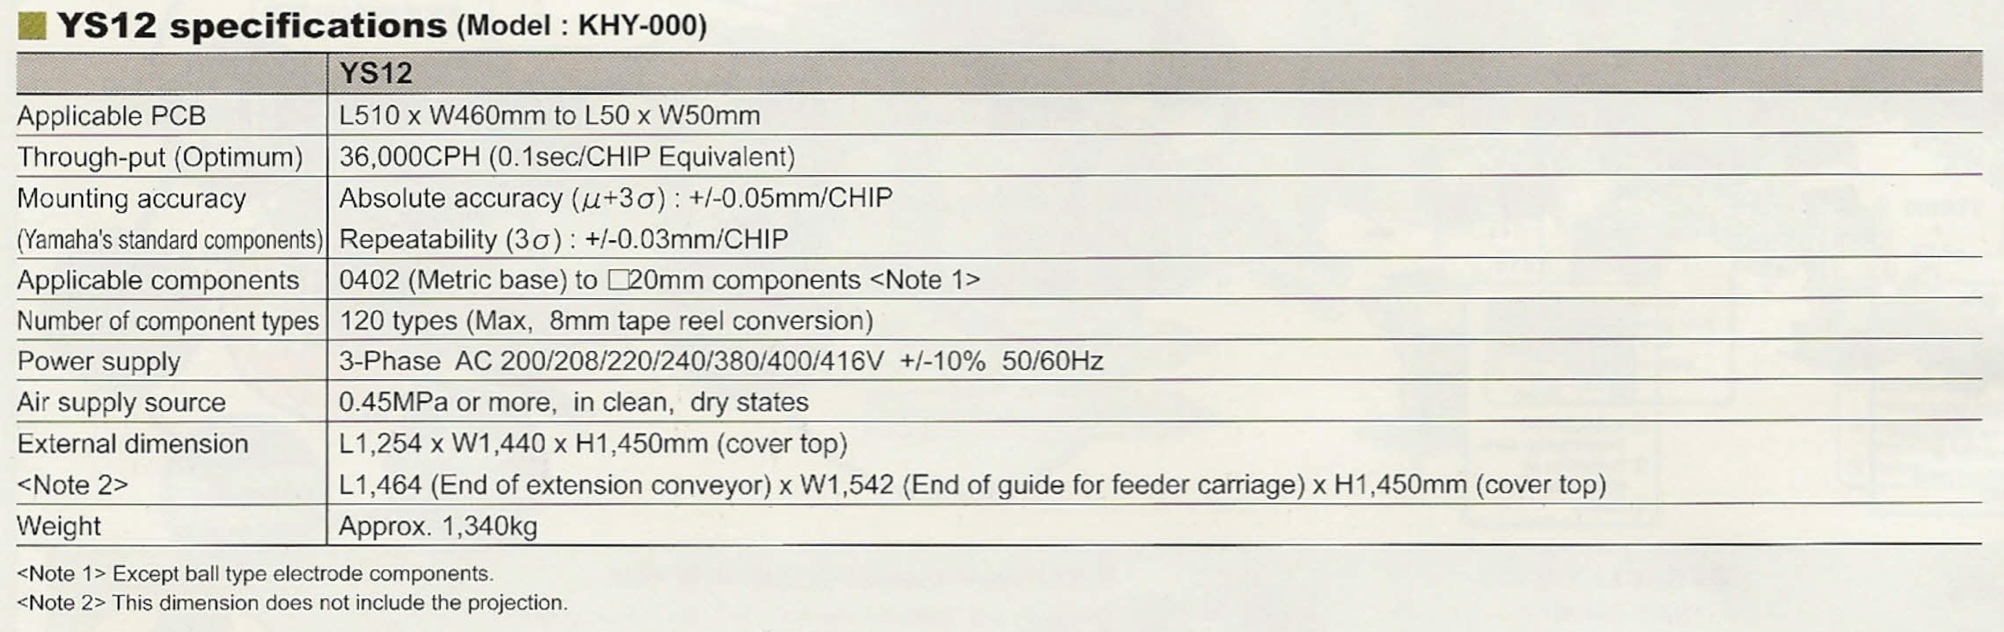 YS12 specifications